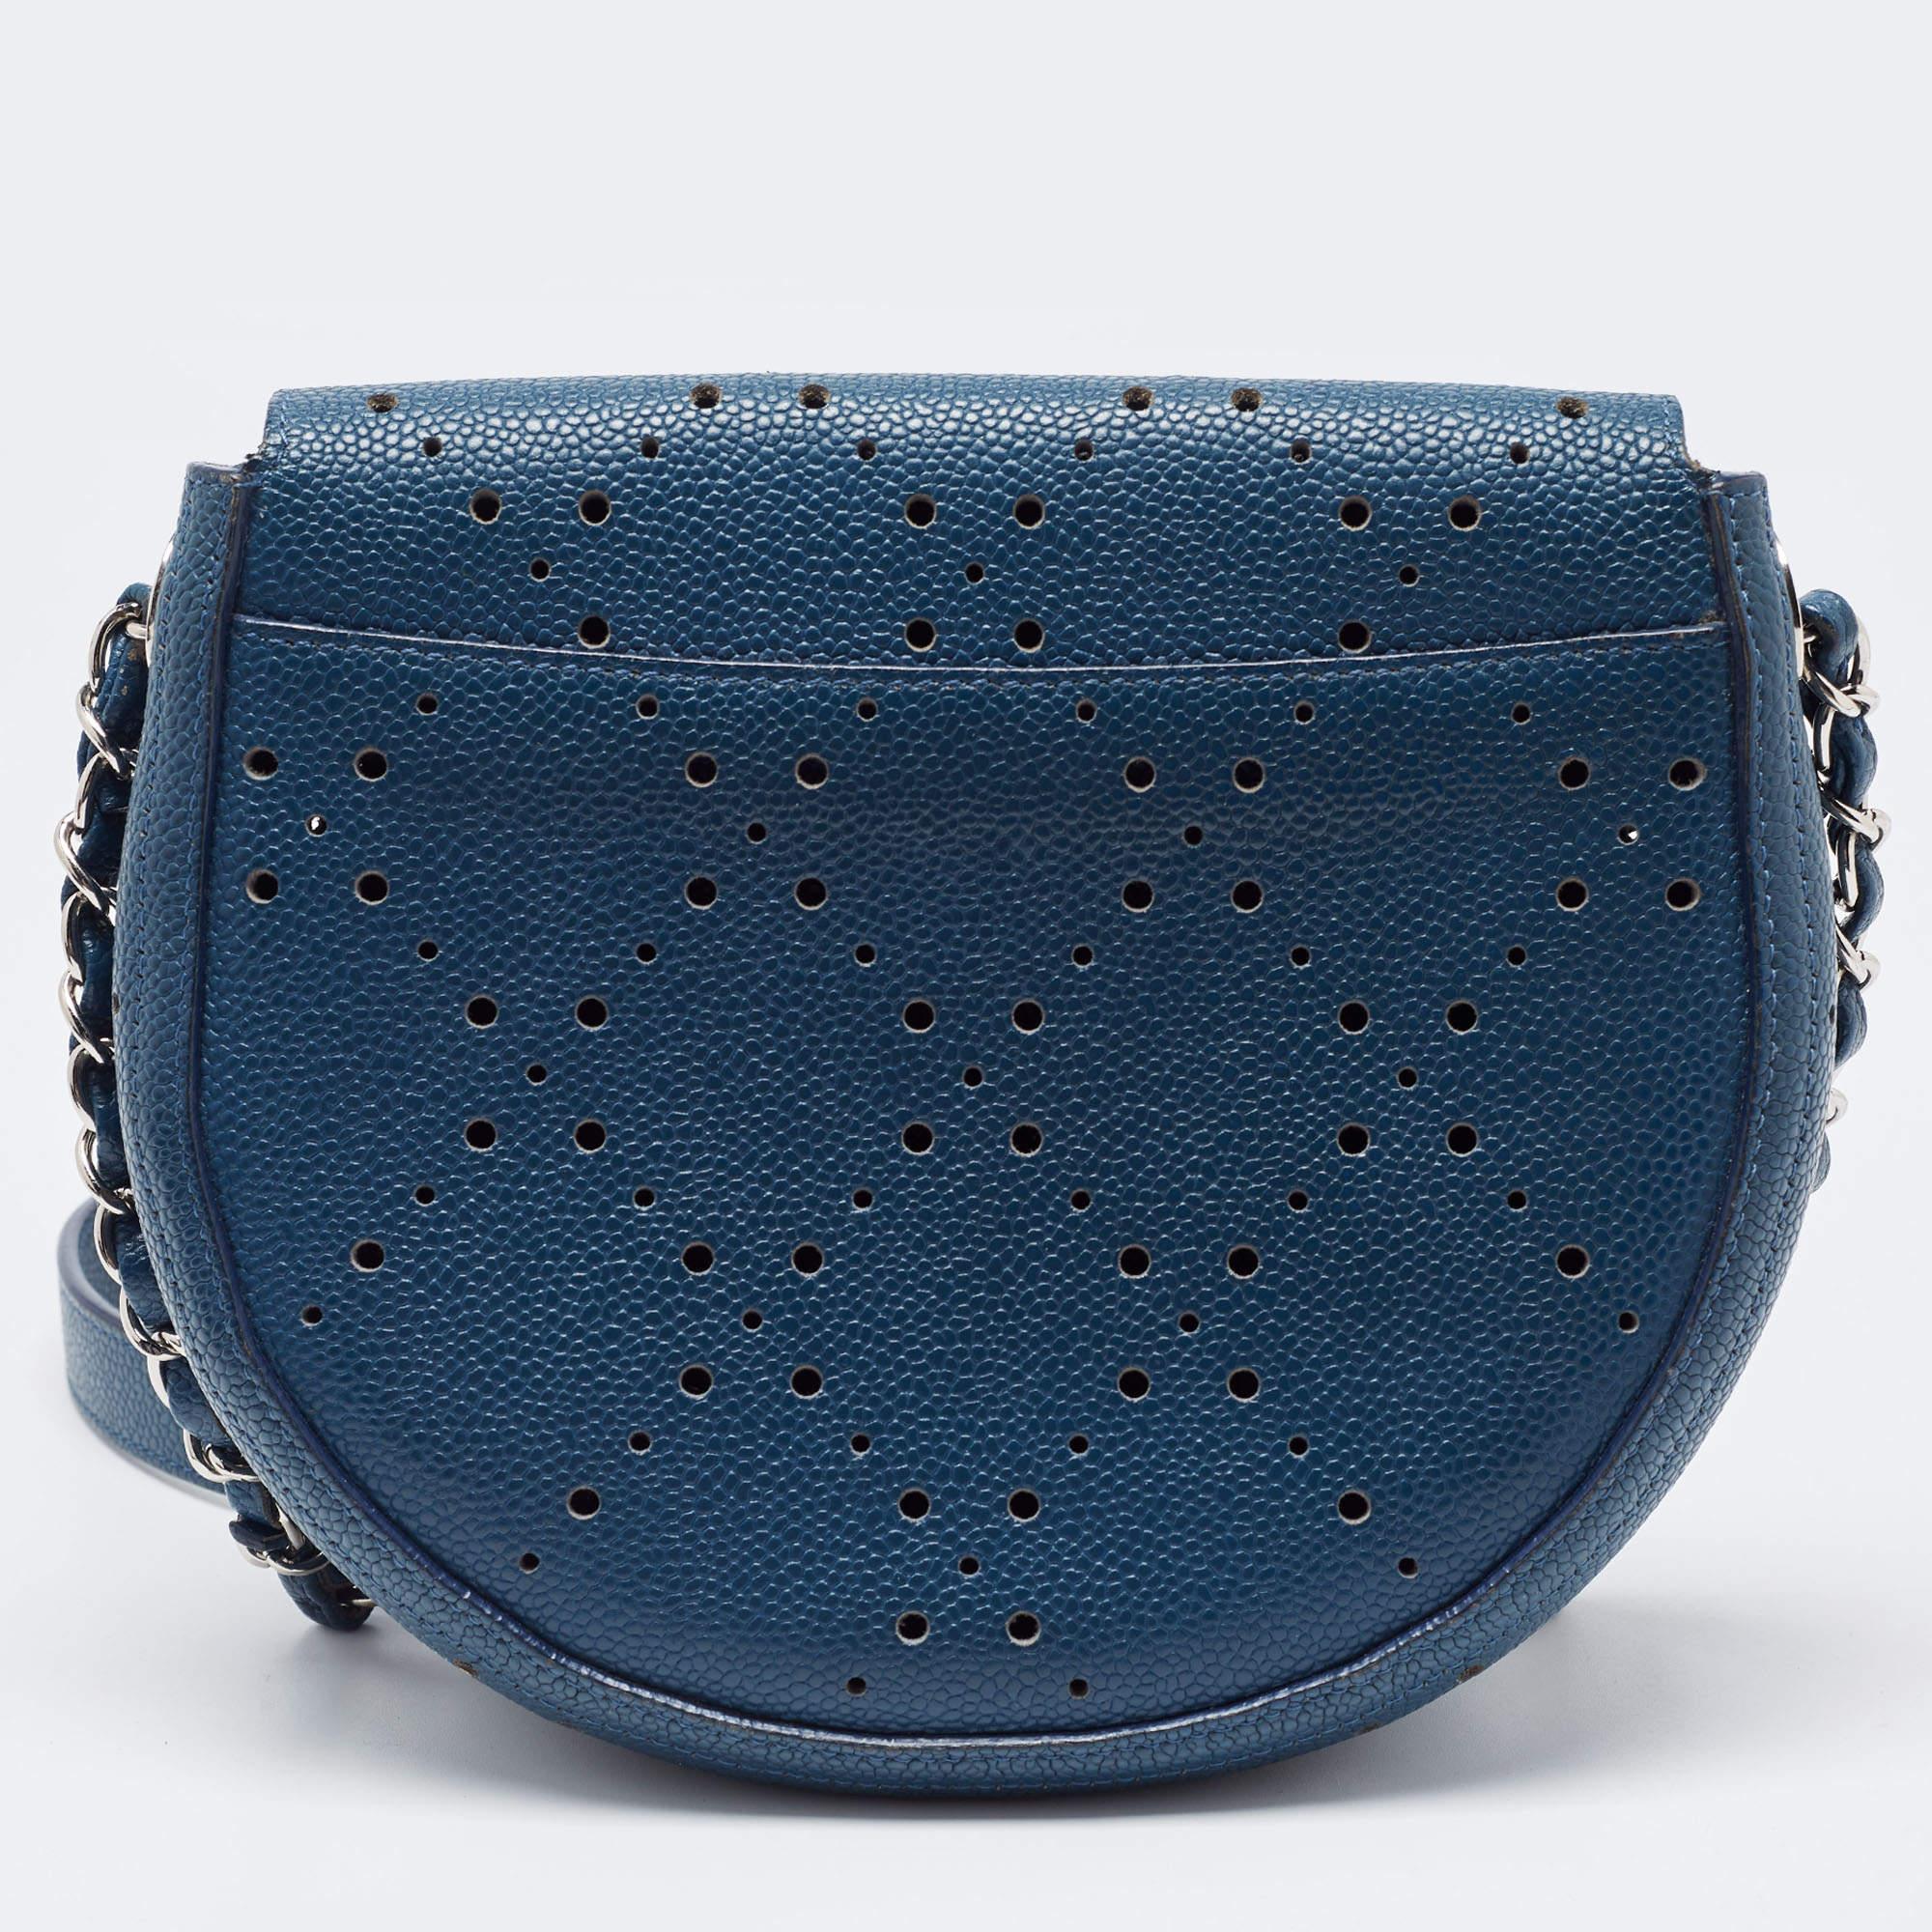 Women's Chanel Blue Quilted Caviar Perforated Leather Crossbody Bag